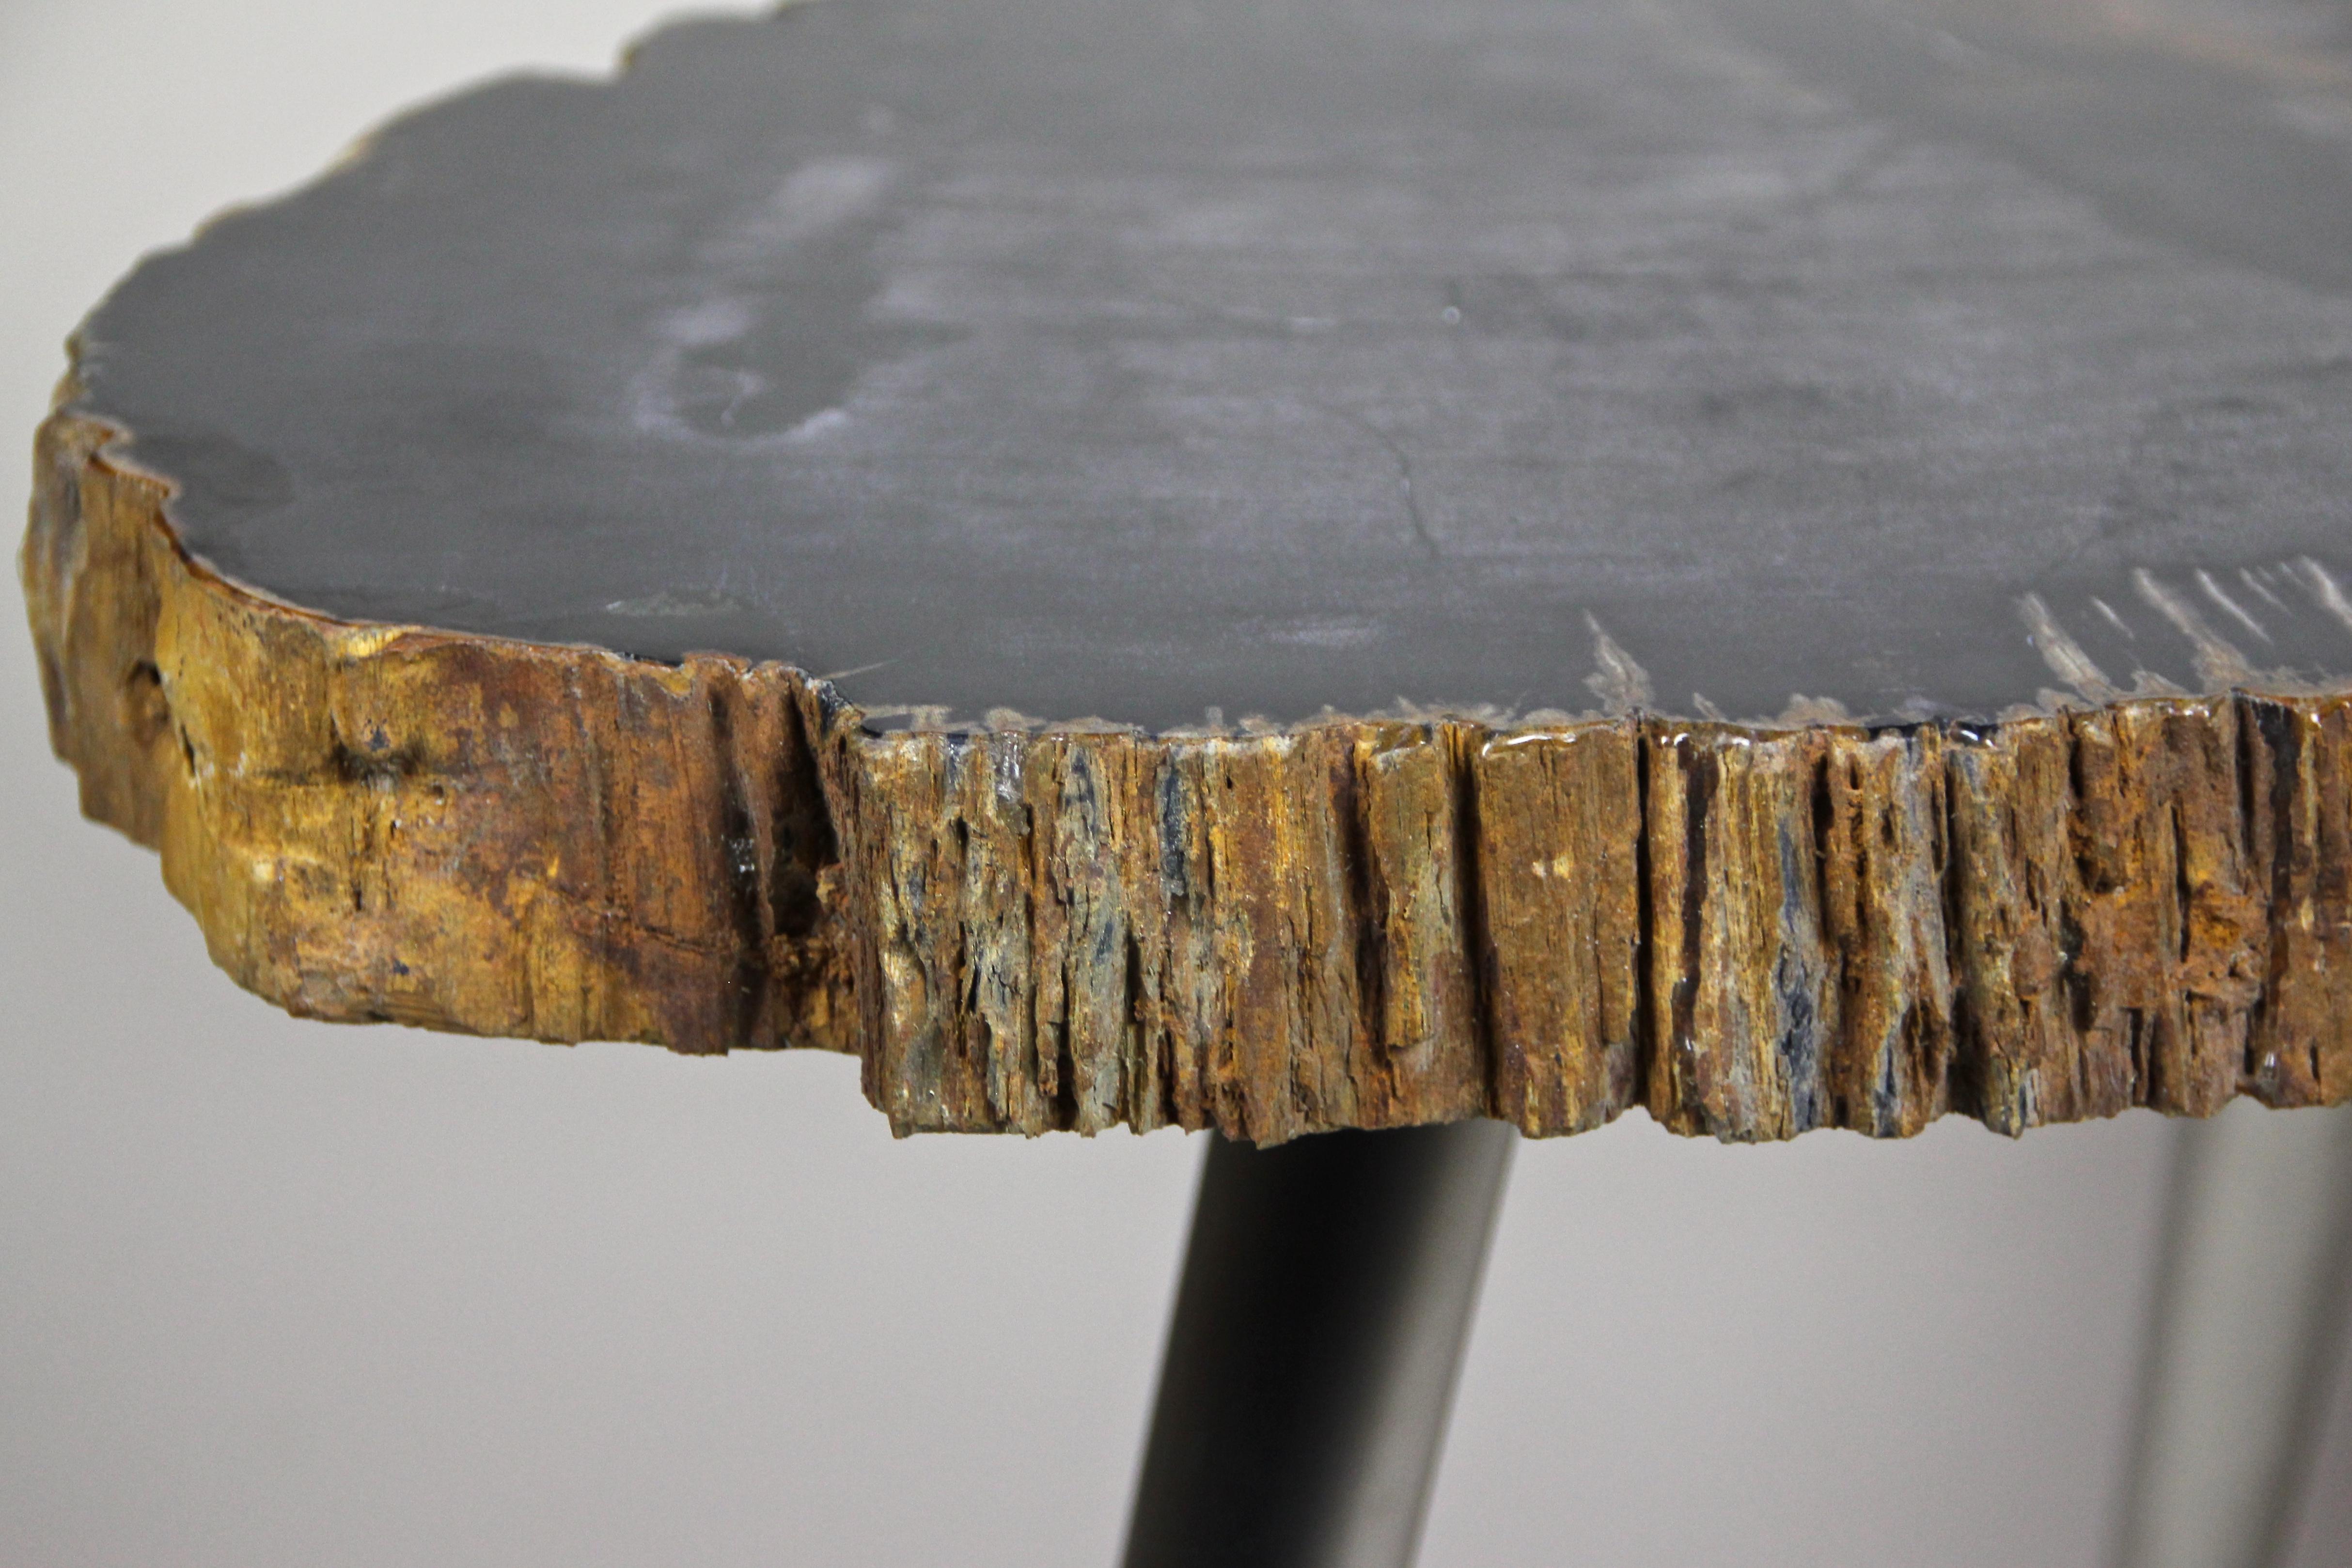 Contemporary petrified wood coffee table on stainless steel feet. A small, organic modern side table/ coffee table which plate consists of precious petrified wood, showing a black surface adorned by white and light brown veins running through it.